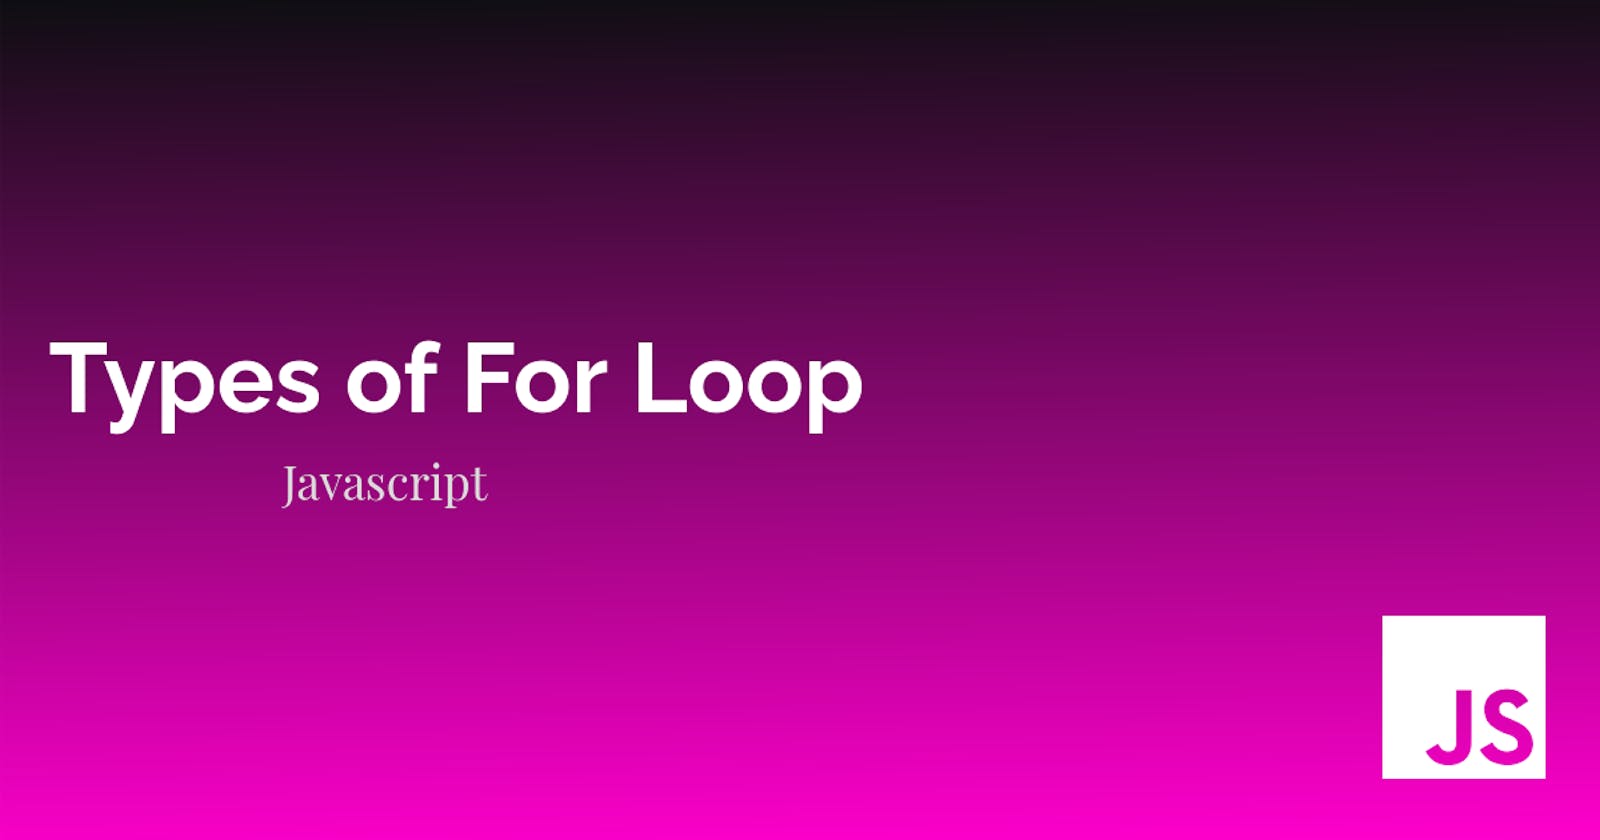 Ways to loop in an array using the different types of "FOR LOOP" in Javascript.